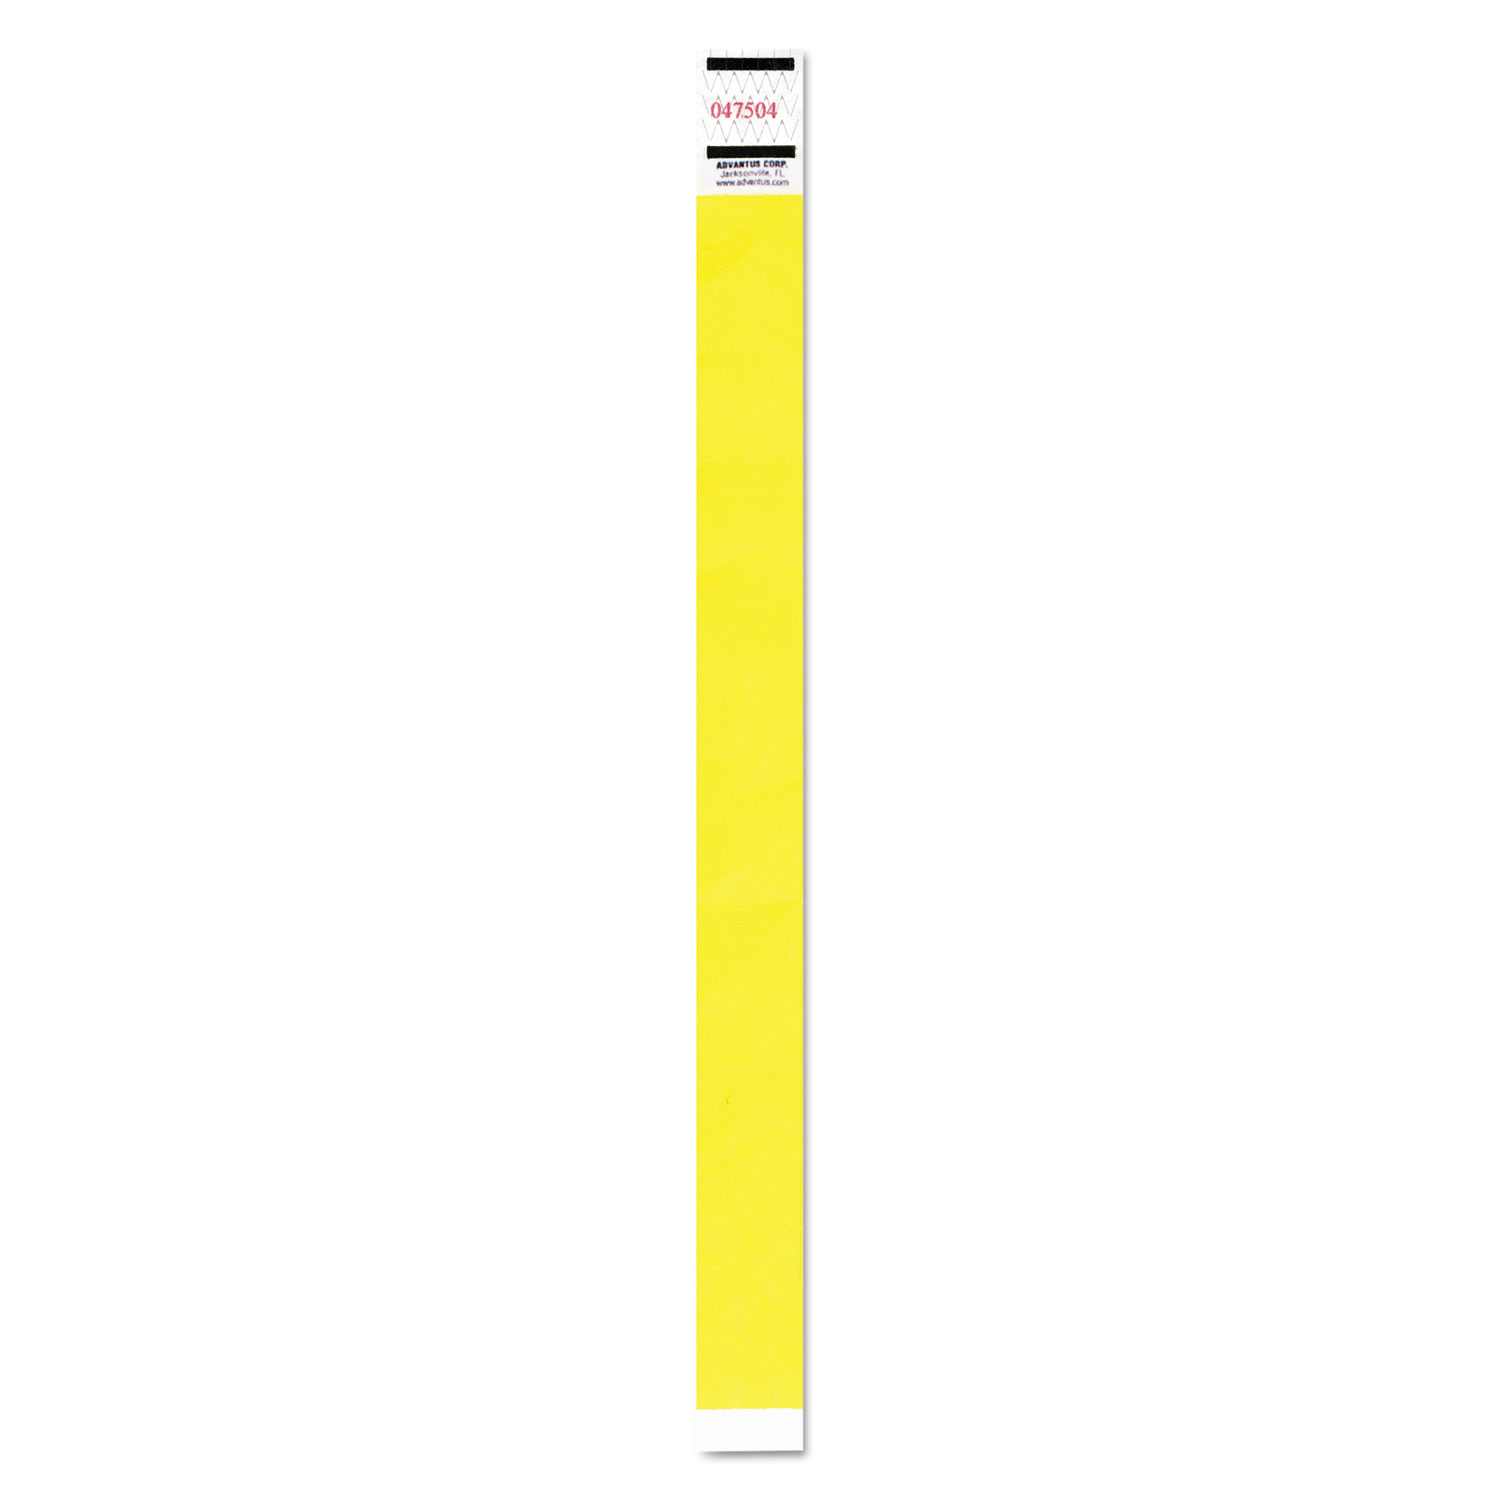 Crowd Management Wristband, Sequential Numbers, 9 3/4 x 3/4, Neon Yellow,500/PK